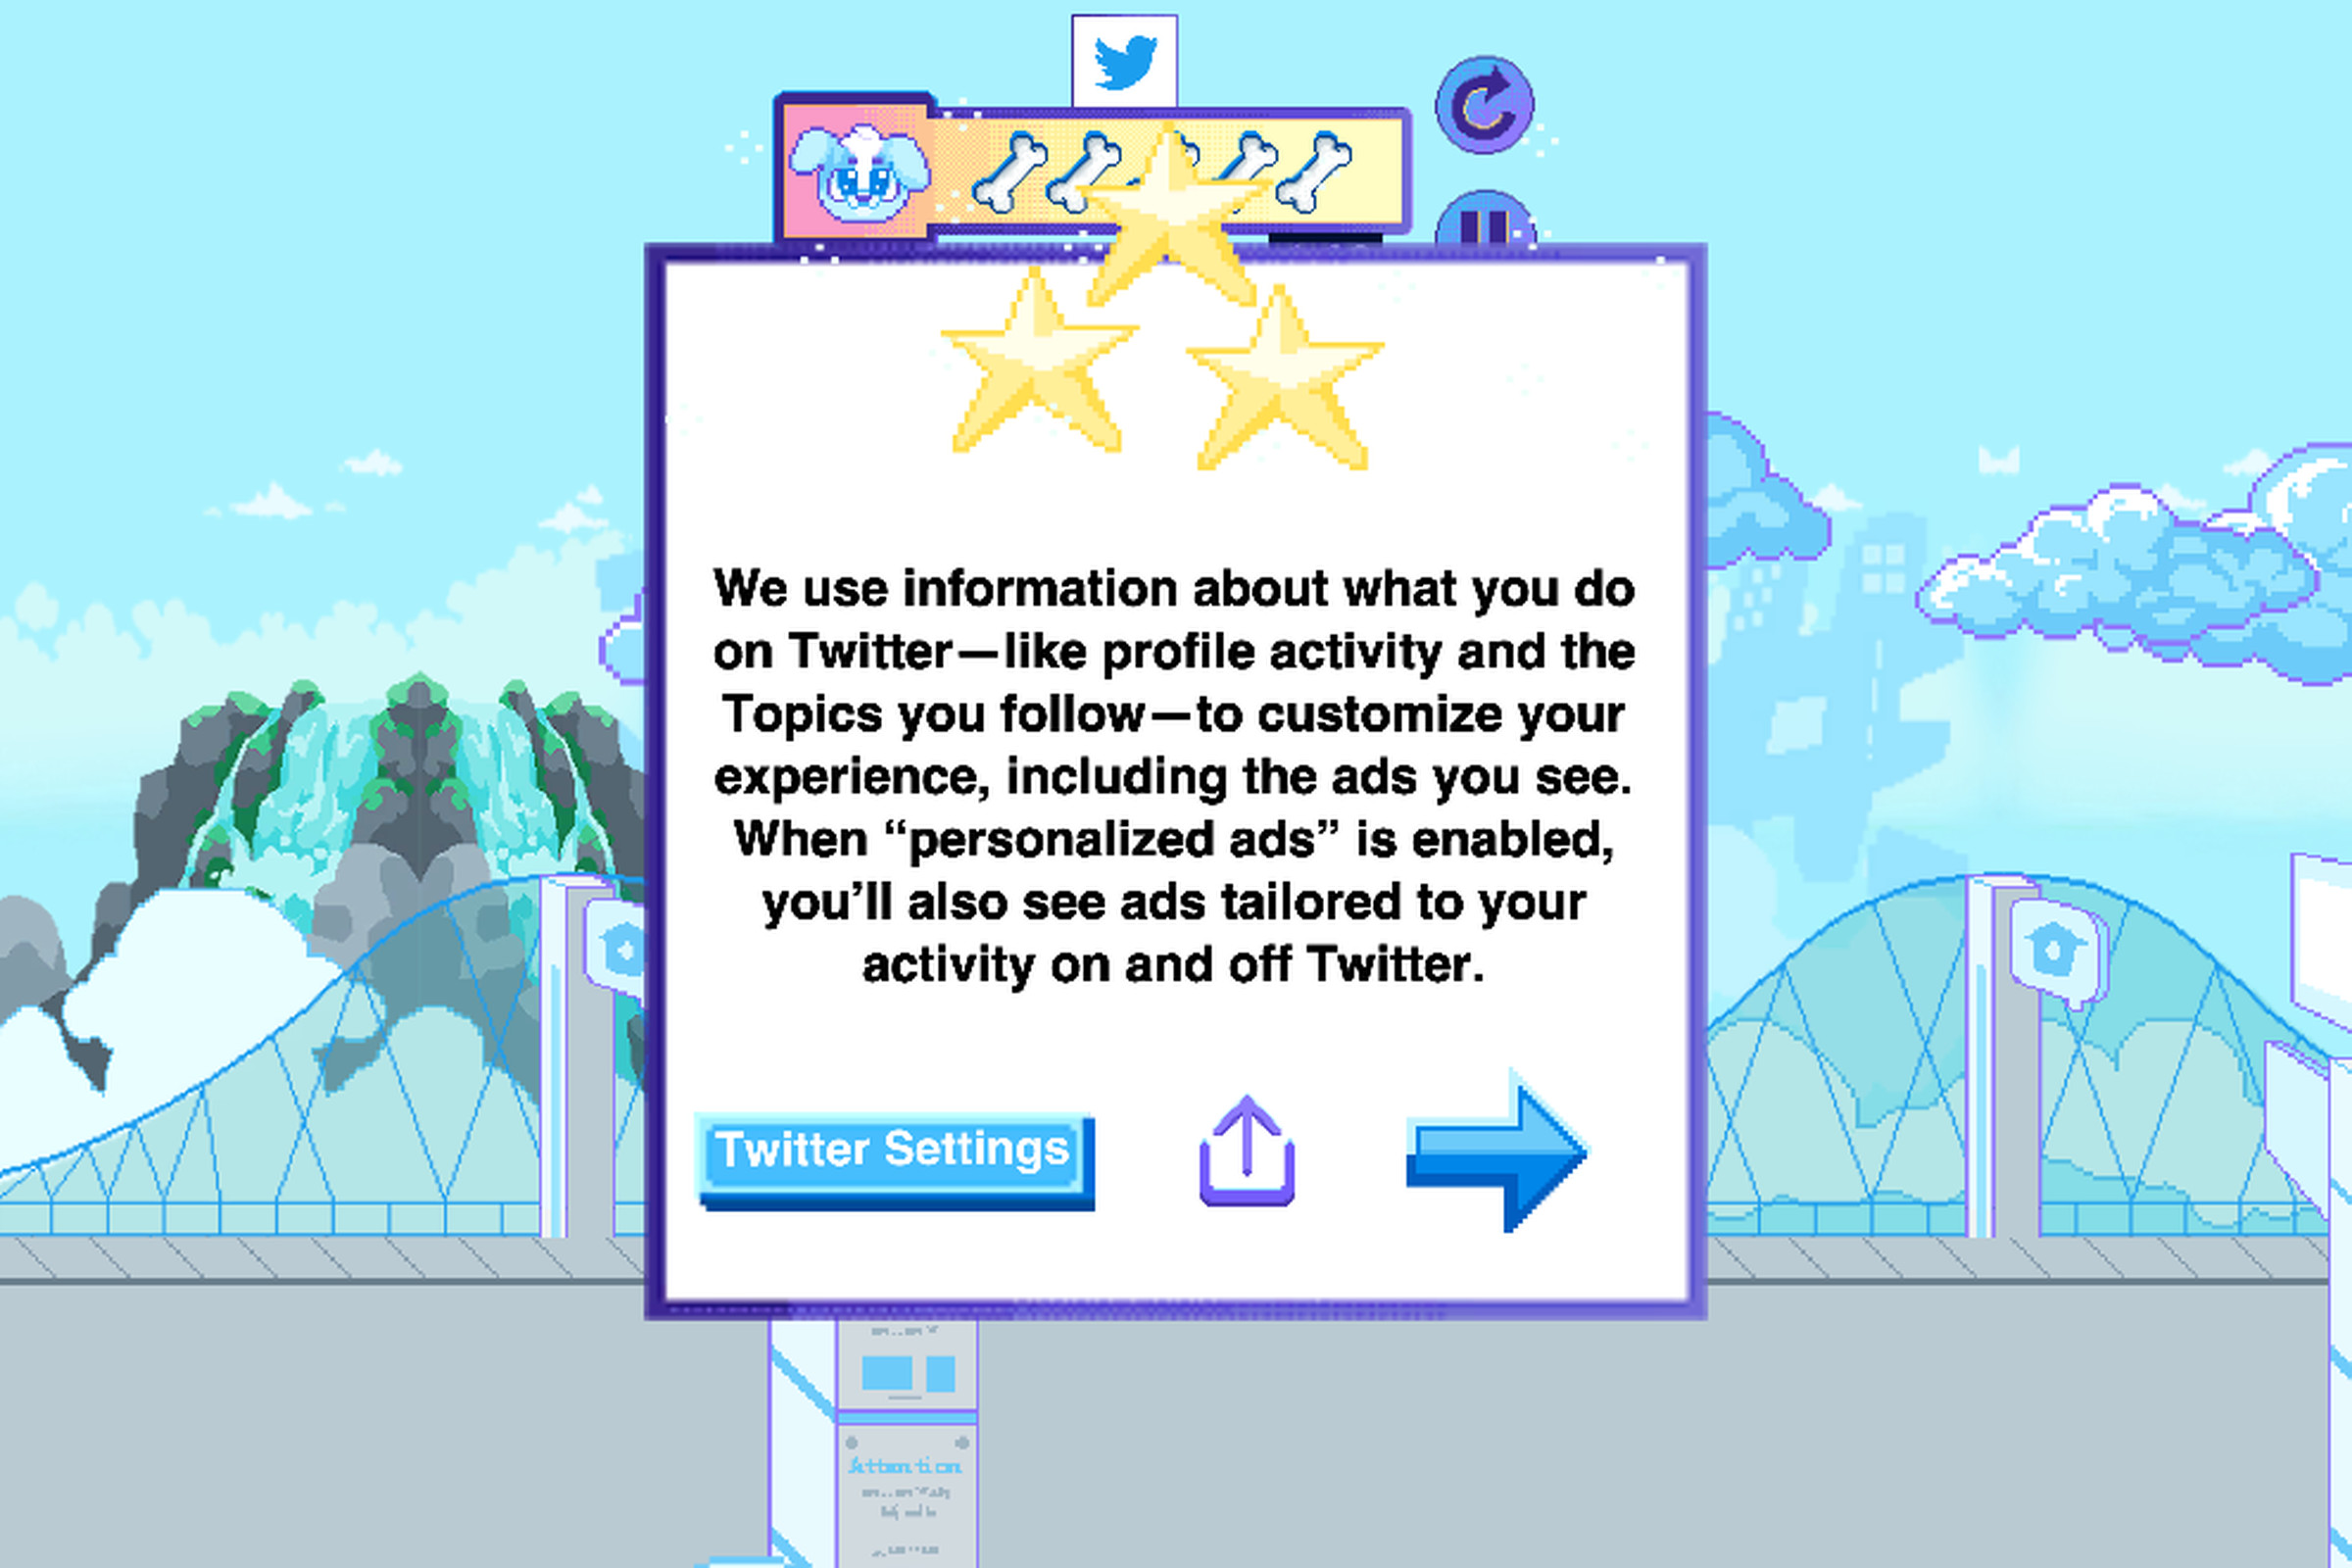 A message describing how Twitter customizes your experience on the social network, including ads.